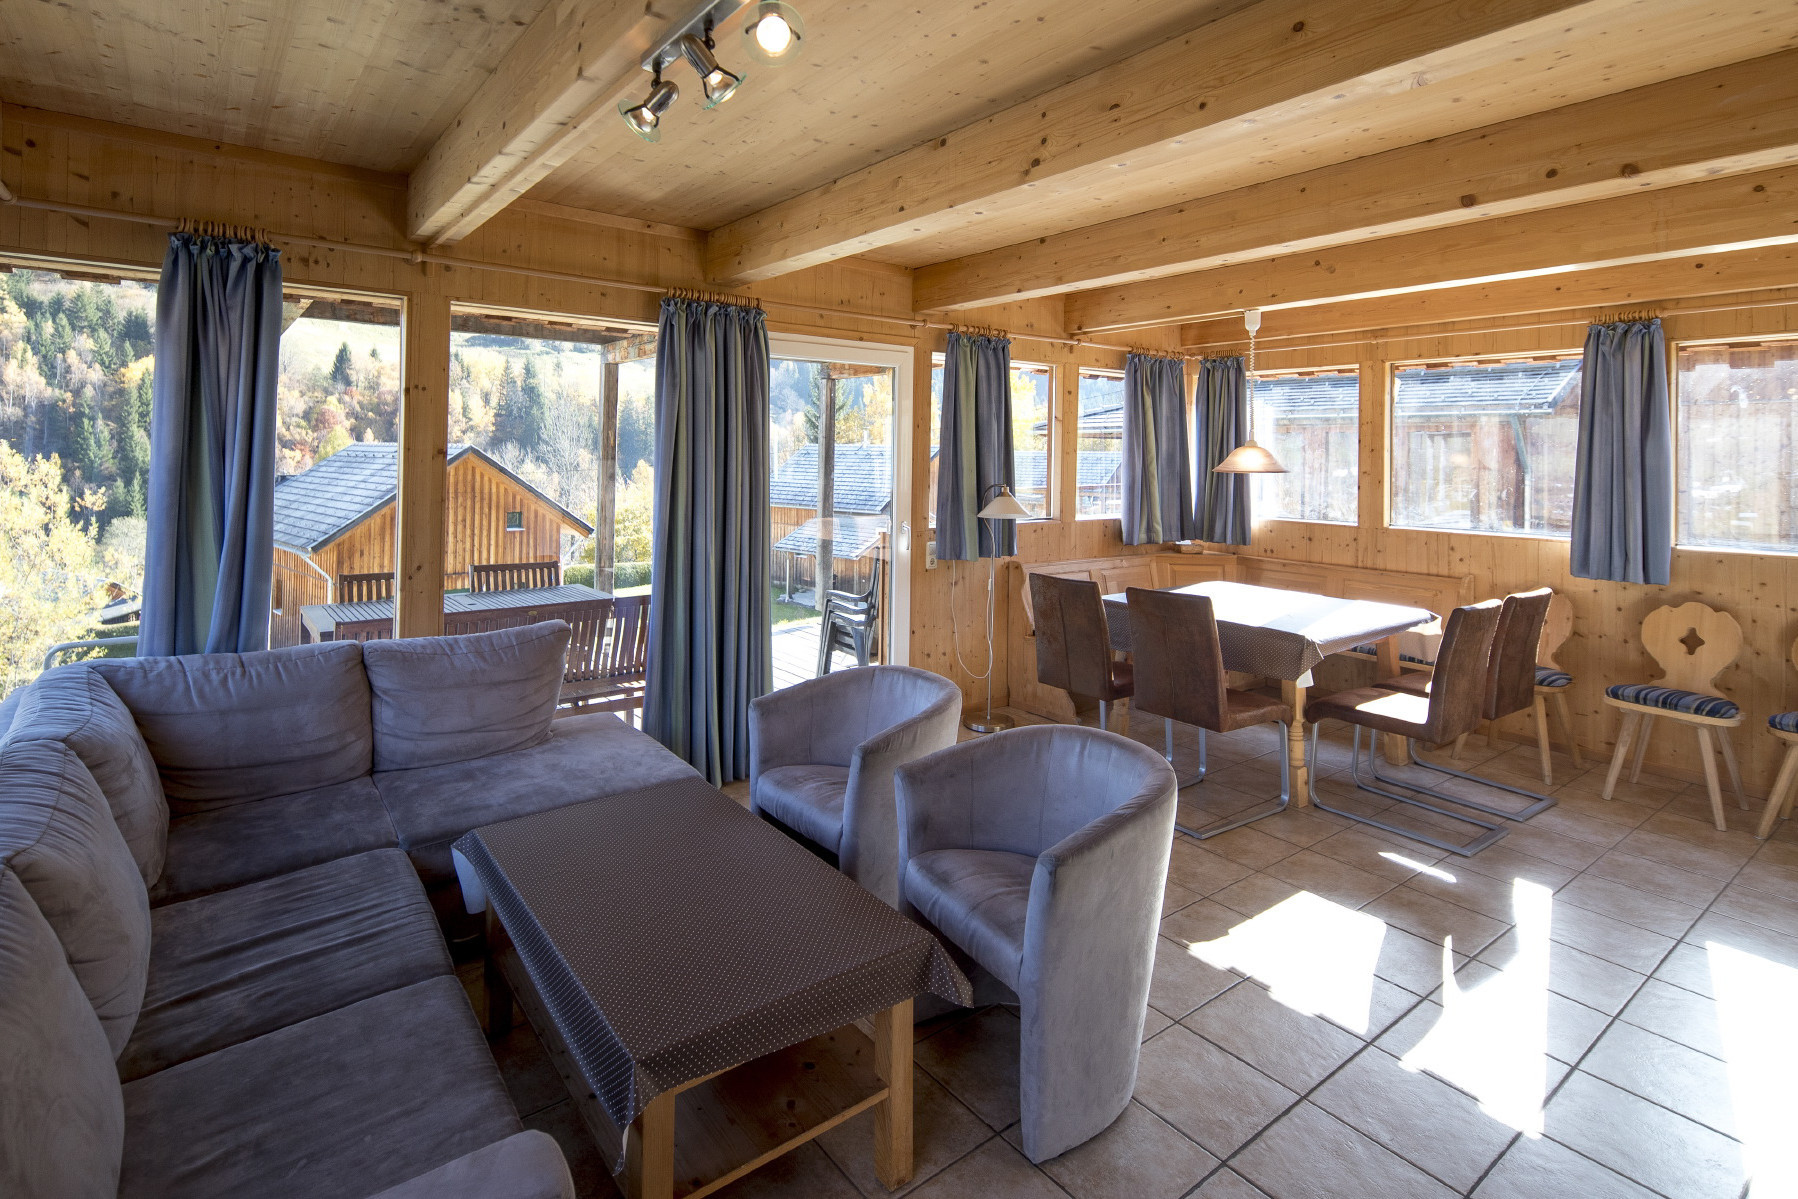  in Stadl an der Mur - Chalet # 160 with 3 bedrooms